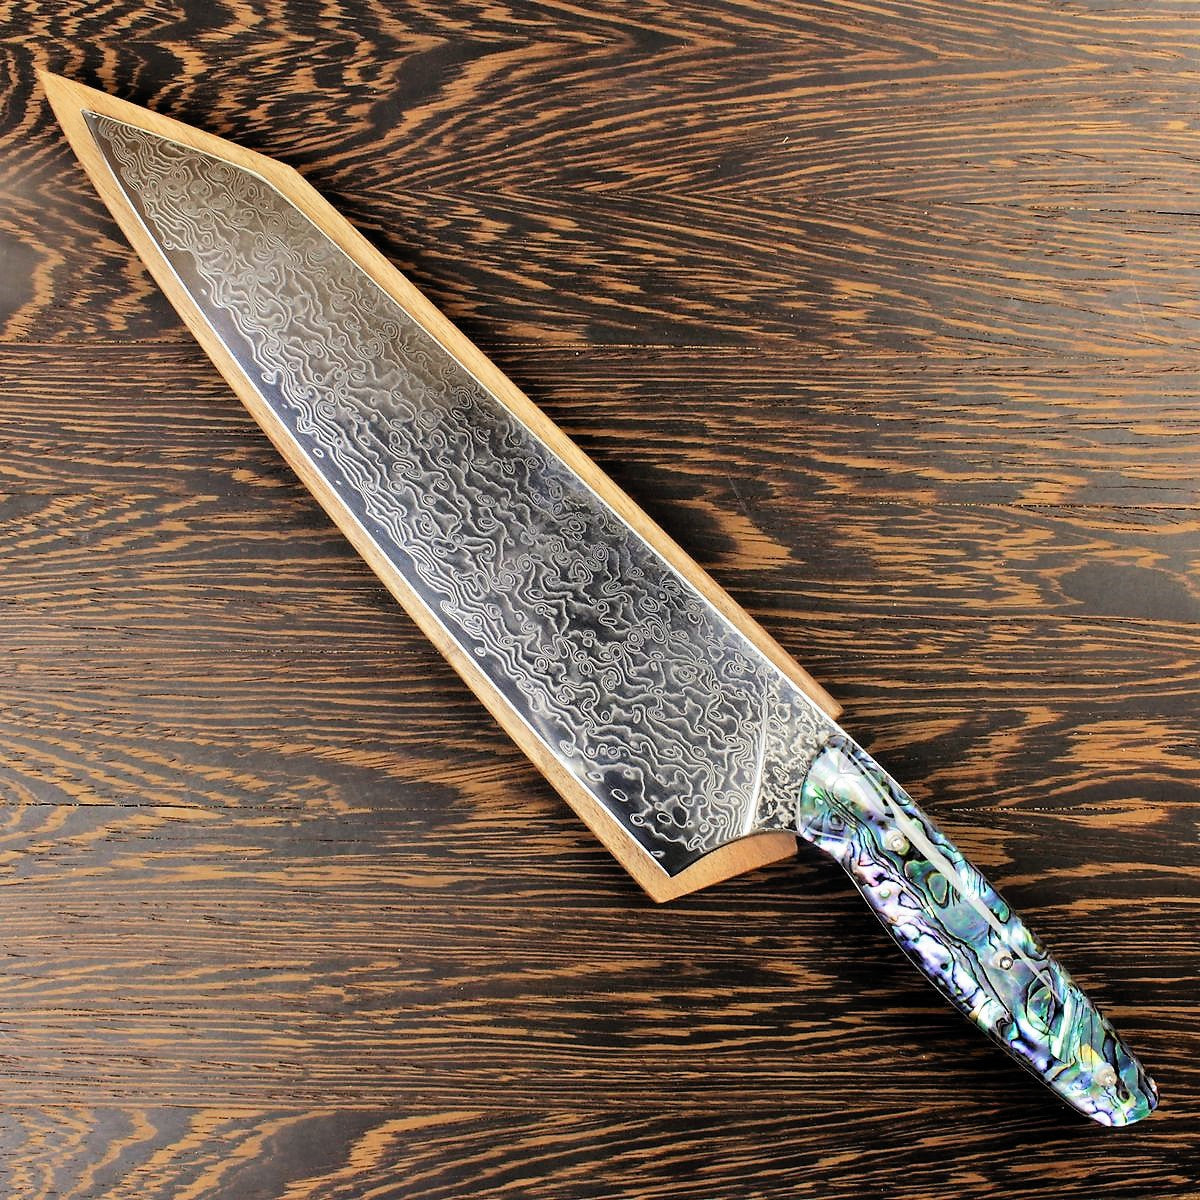 Son Of A Pearl - Gyuto K-tip 10in Chef's Knife - Mother of Pearl